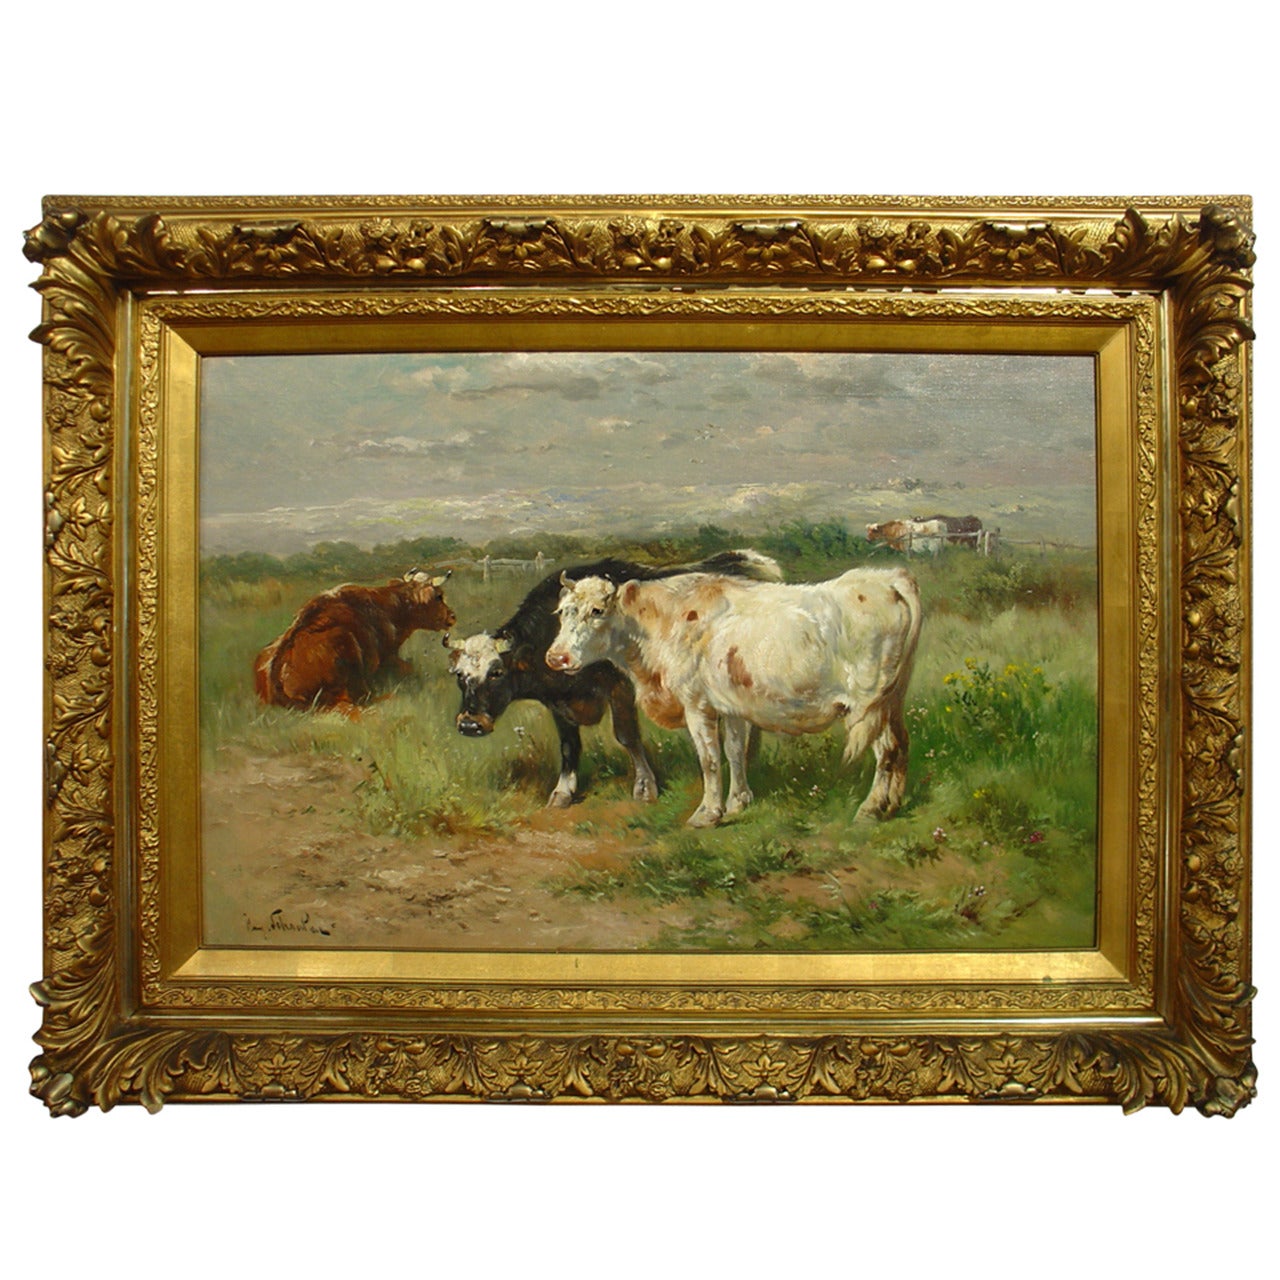 A Large Framed Antique Cow Painting by Schouten